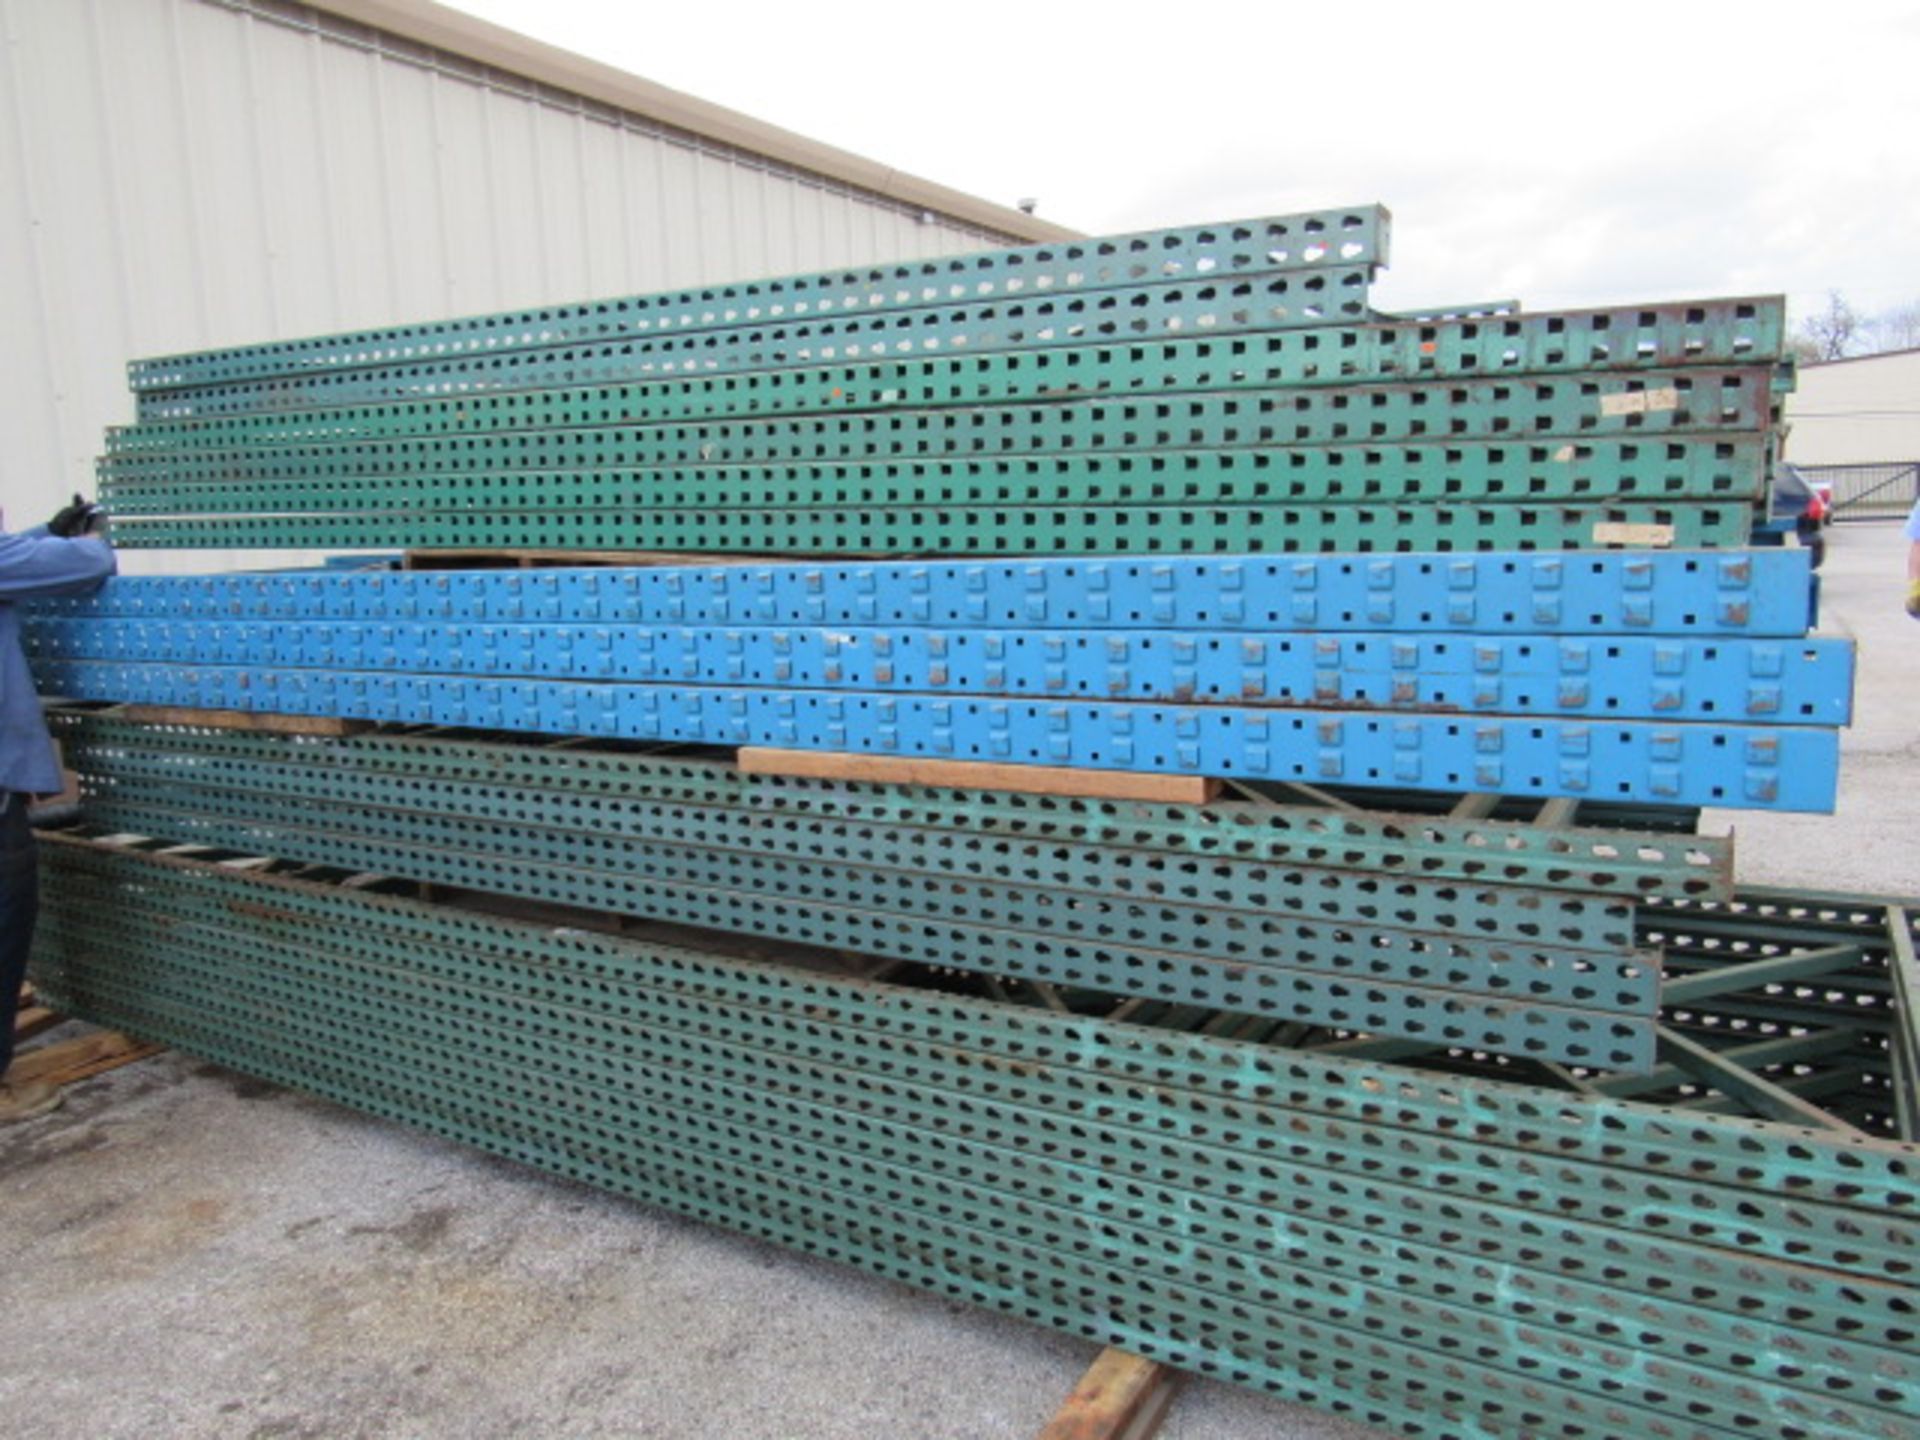 Lot of Pallet Racks with Uprights and Cross Beams - Image 2 of 14